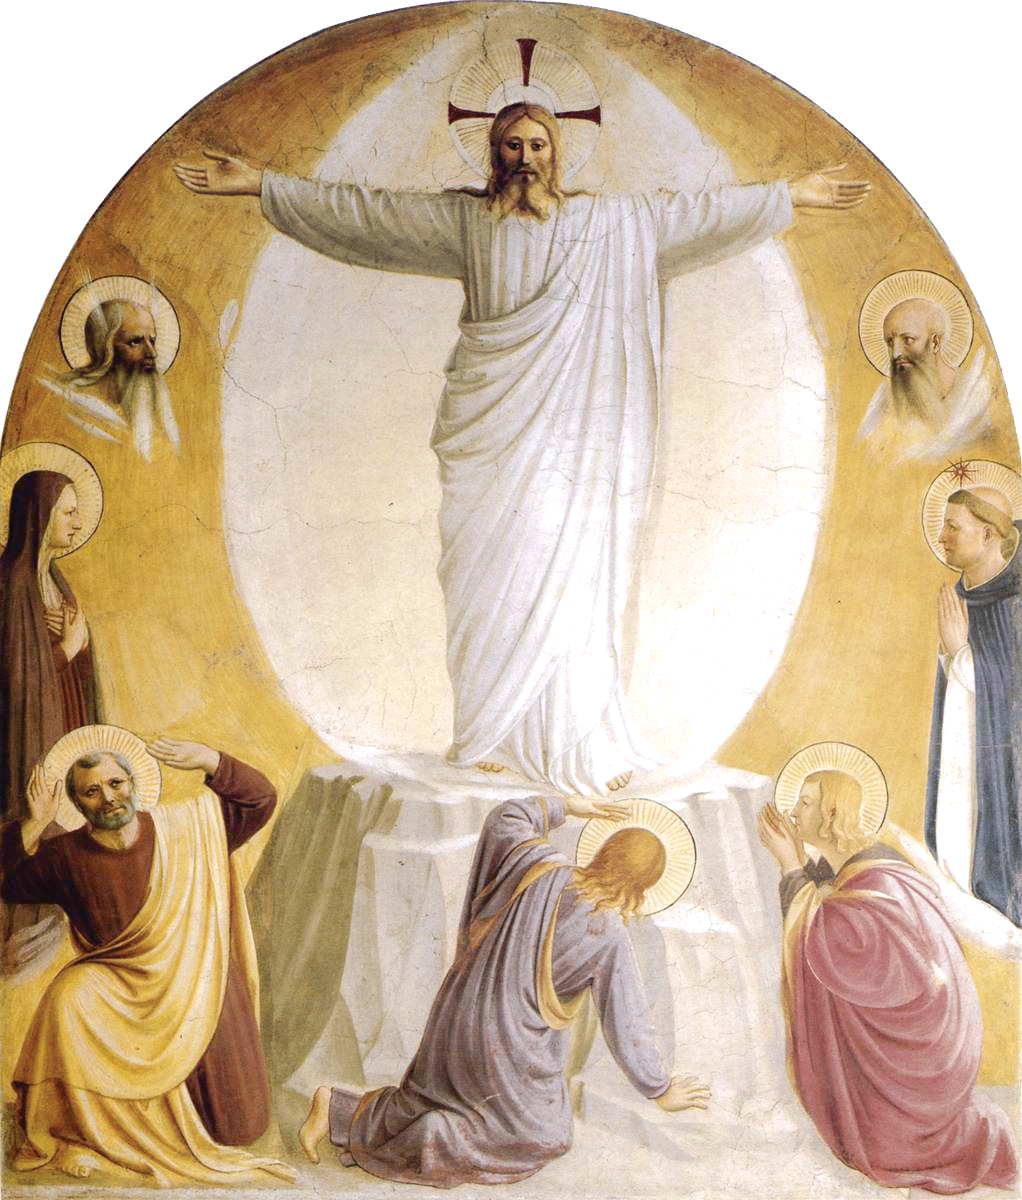 Transfiguration, by Fra Angelico.